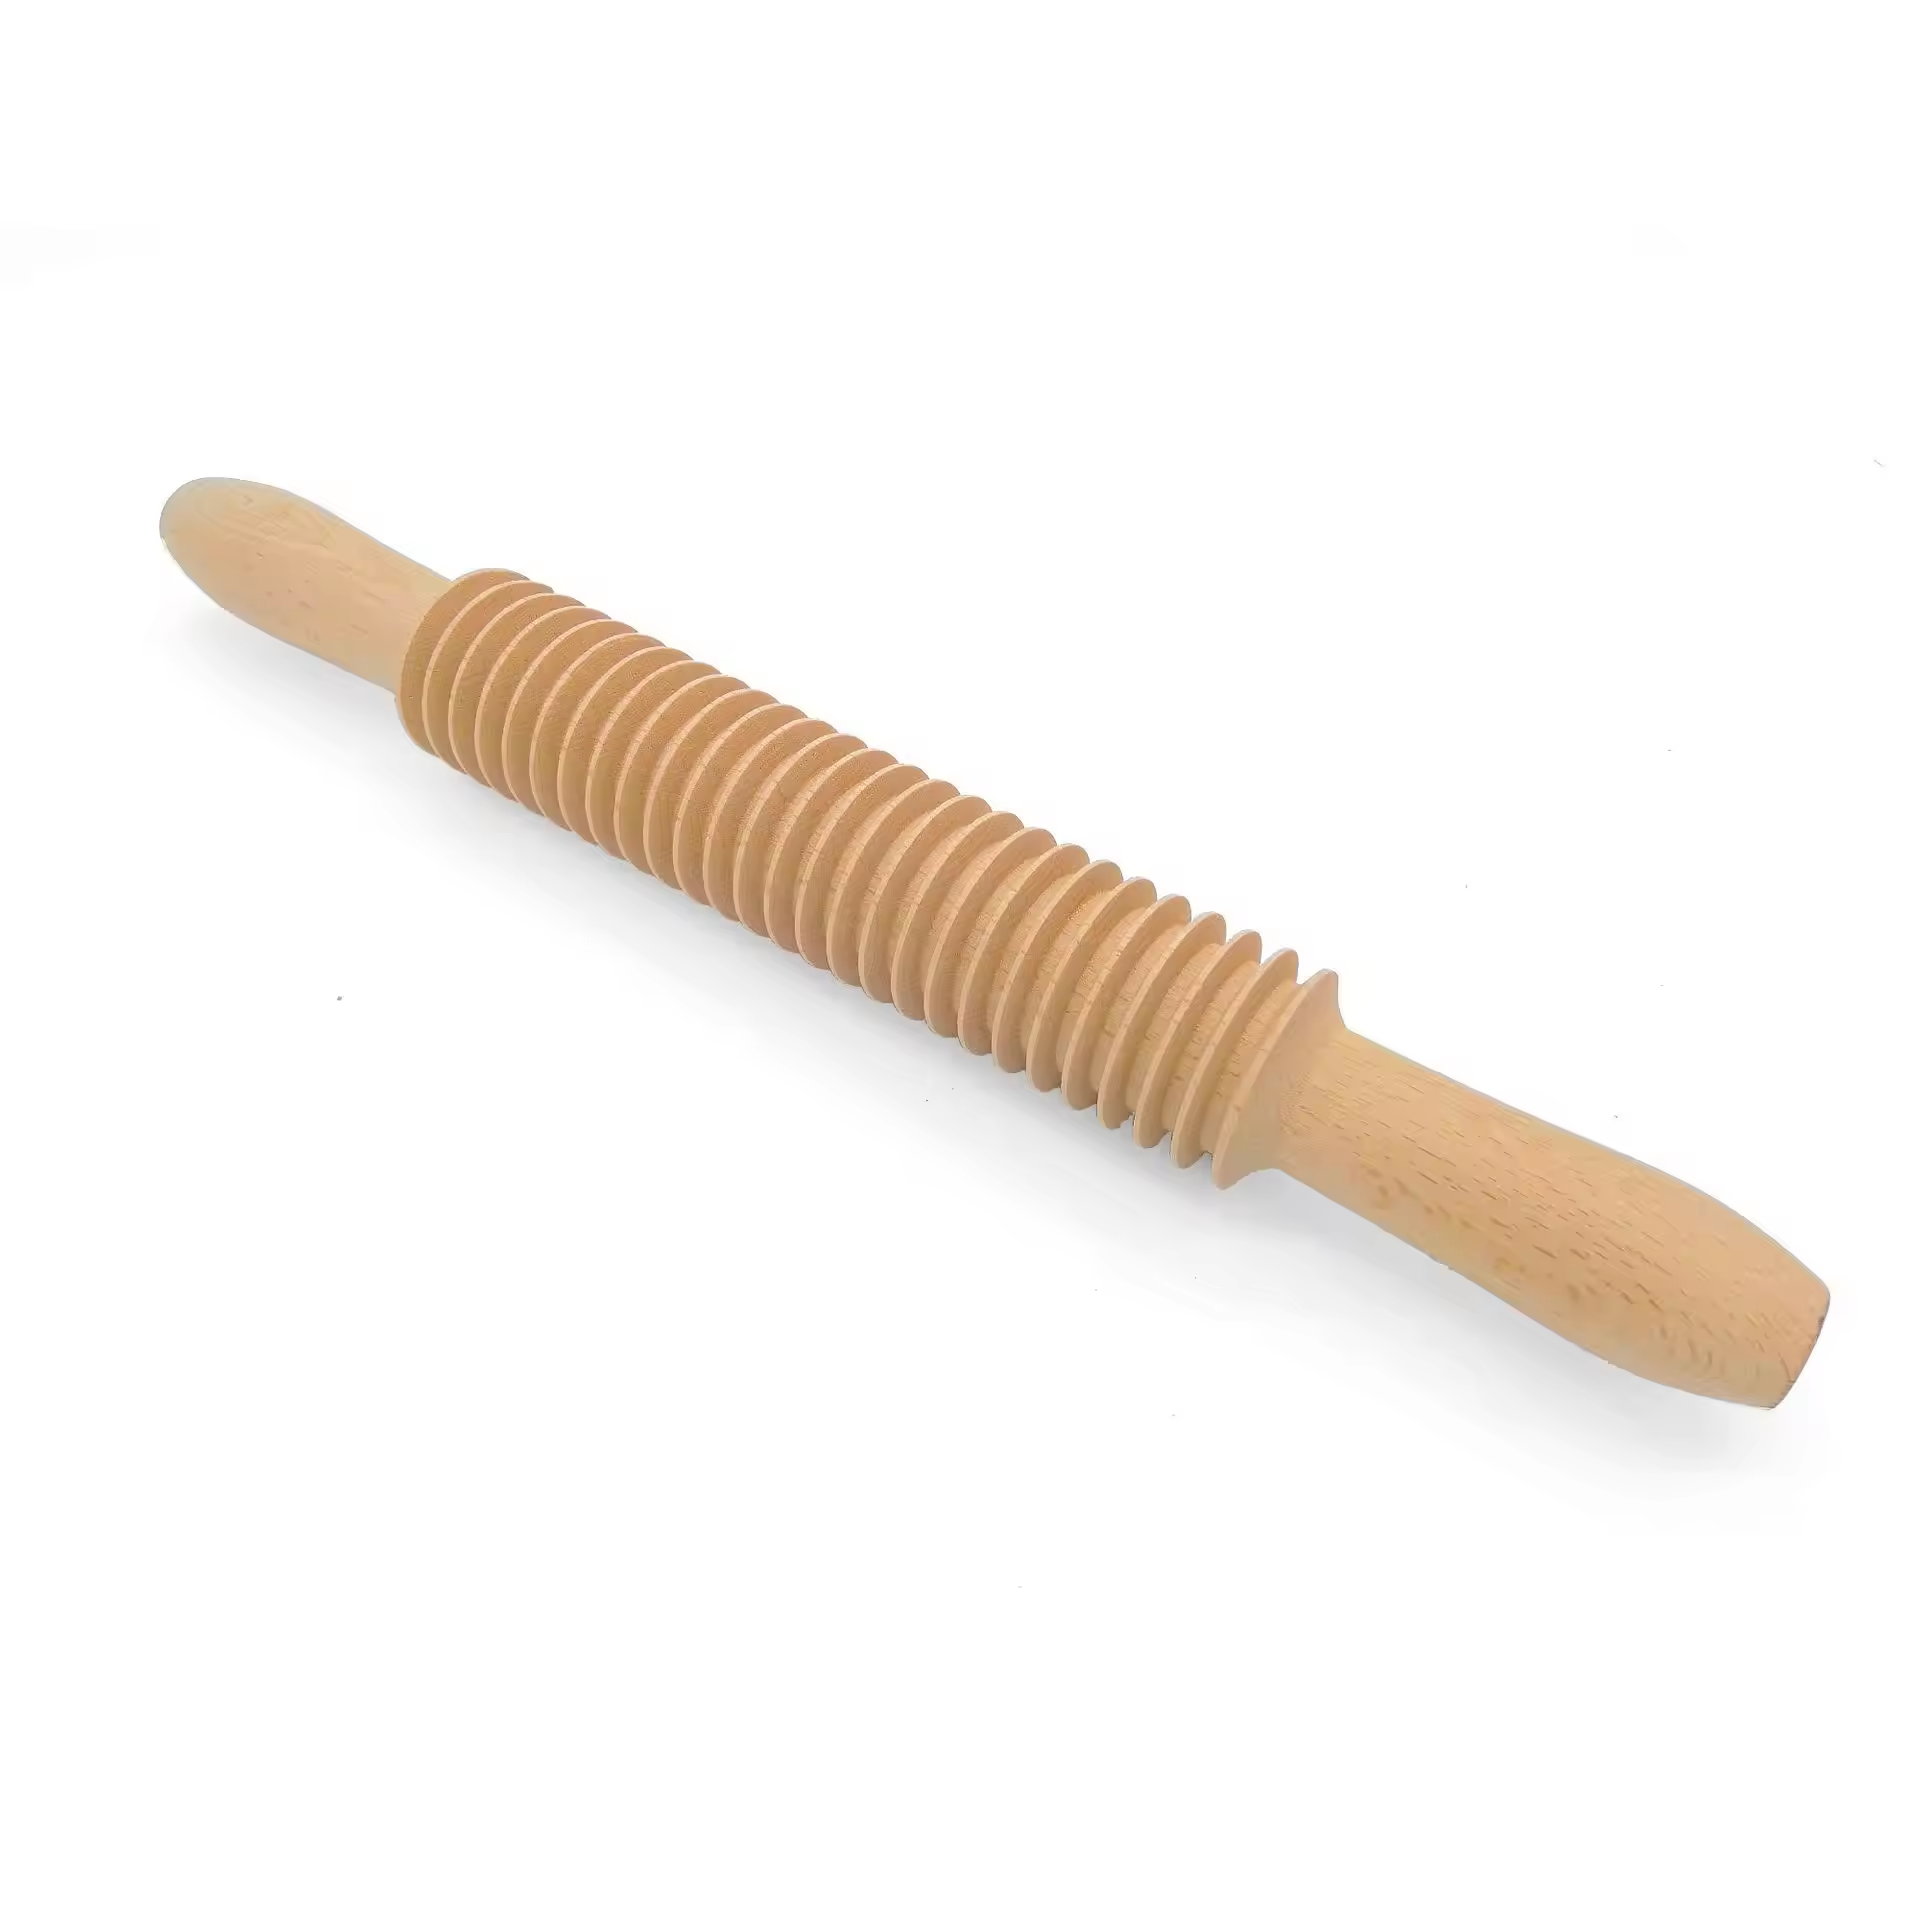 Spaghetti beech wood rolling pin wooden screw thread long thin wood rolling pin manufacturer supplier